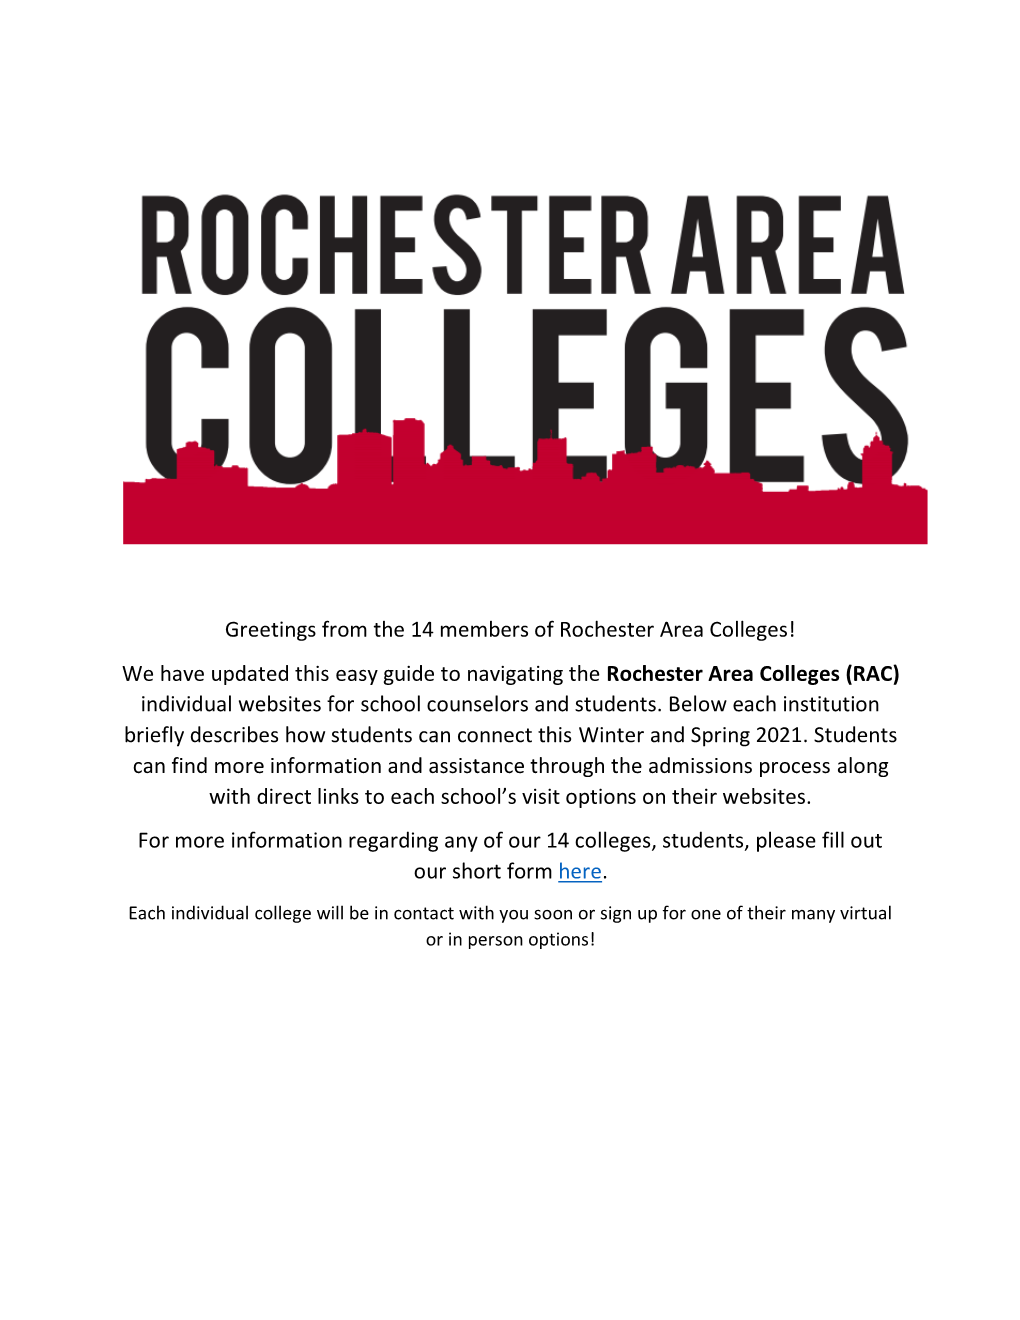 Greetings from the 14 Members of Rochester Area Colleges! We Have